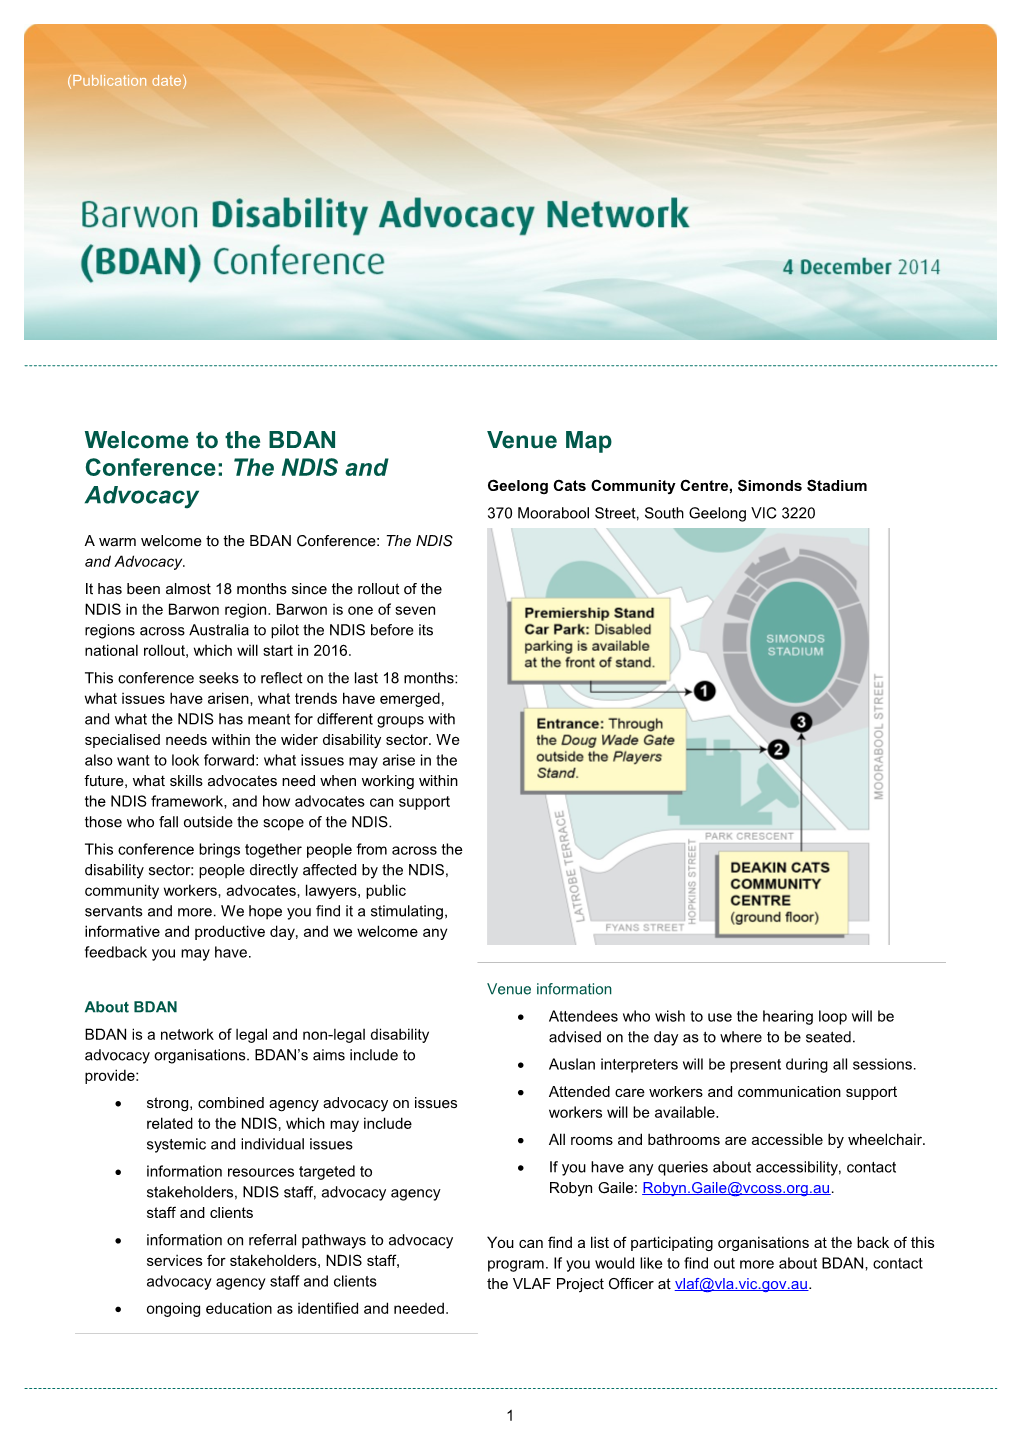 Welcome to the BDAN Conference: the NDIS and Advocacy